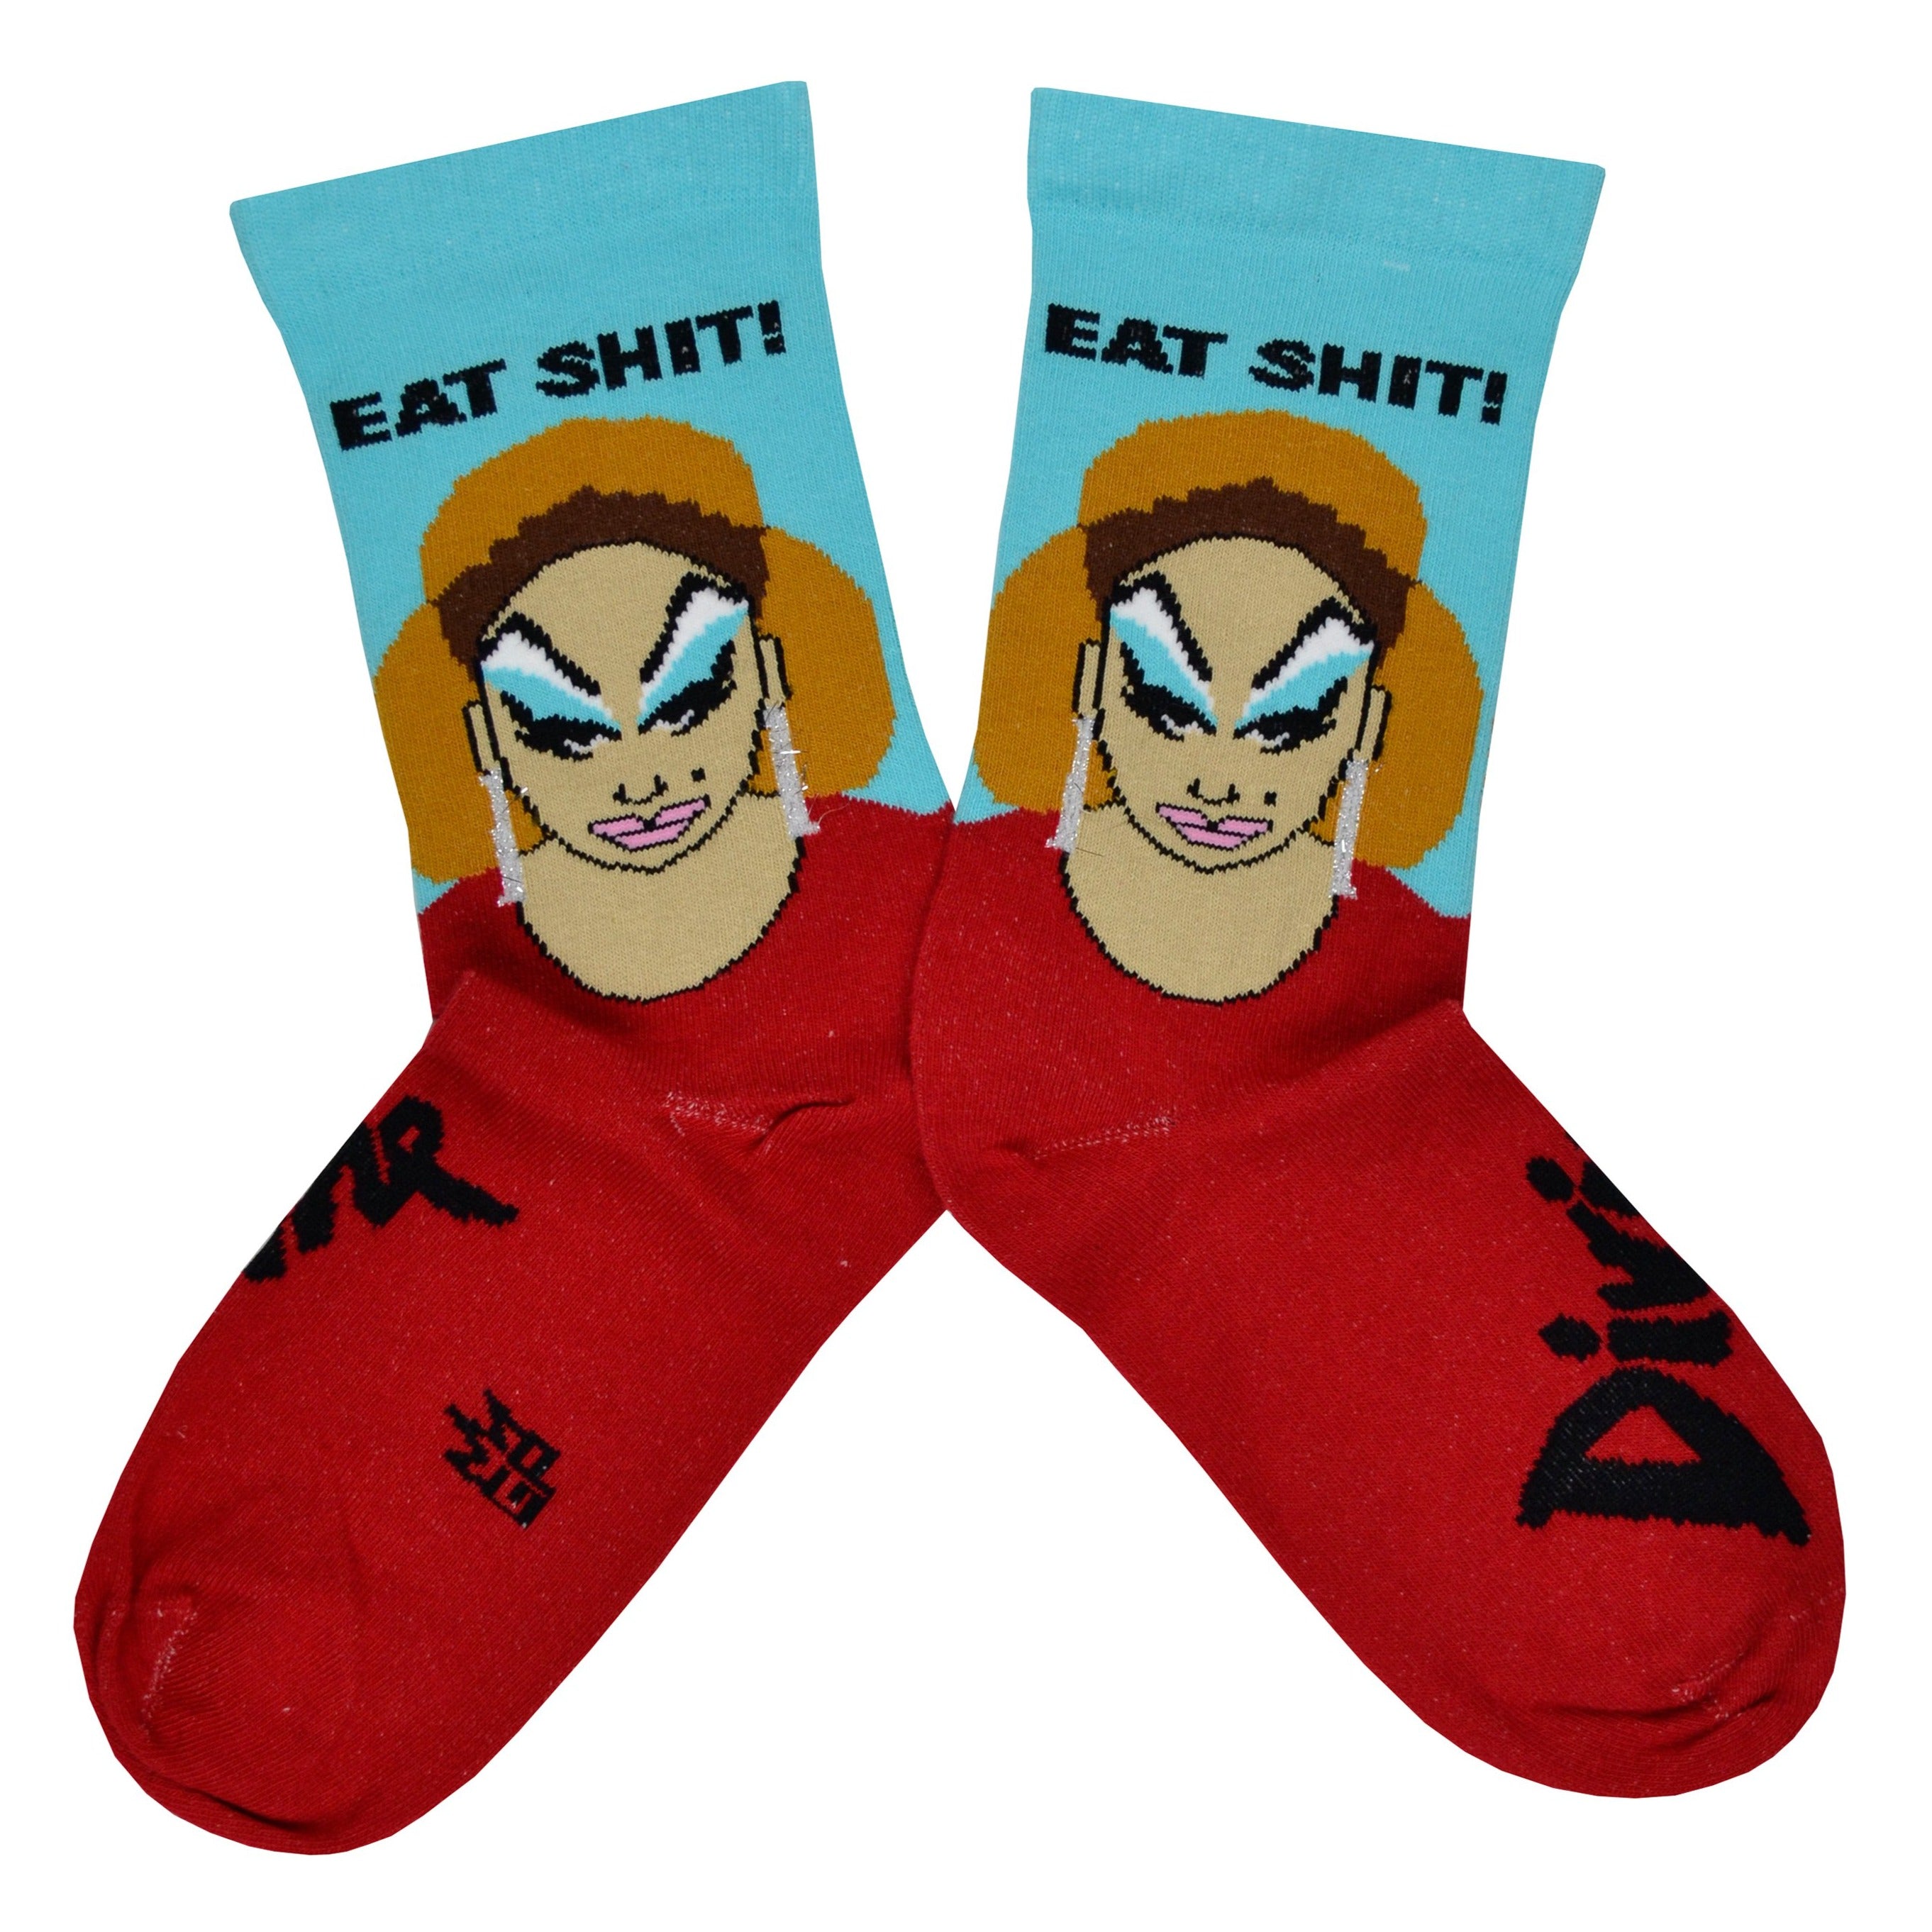 These blue and red cotton unisex crew socks feature a portrait of the legendary drag queen Divine and the words 